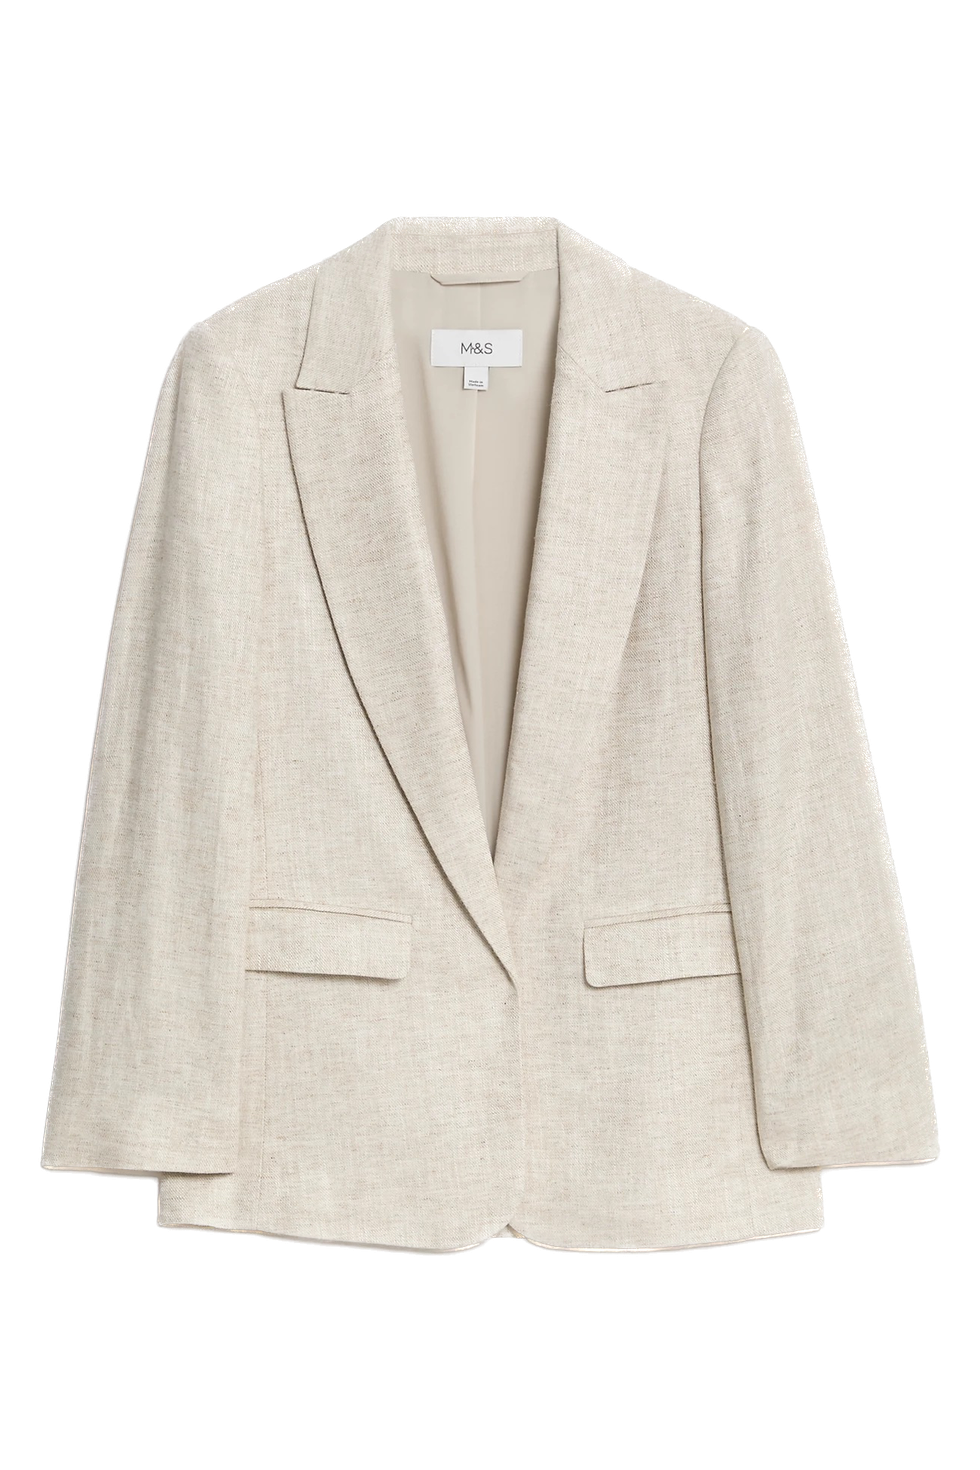 Best summer jackets for women — the styles every woman needs